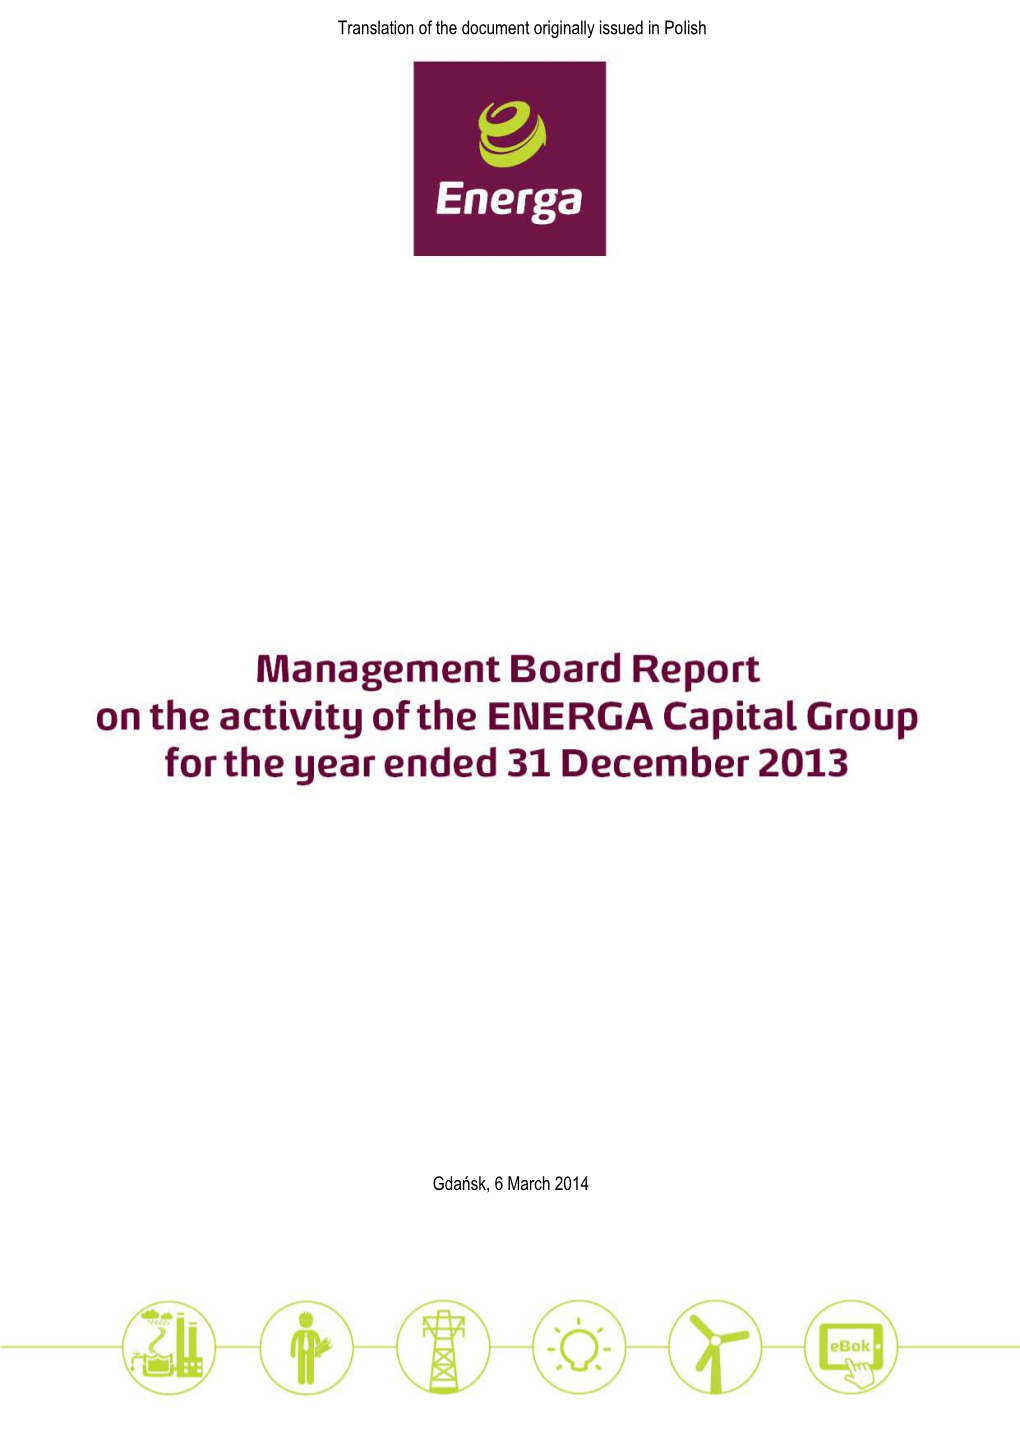 Management Board Report on the Activity of the ENERGA Capital Group for the Year Ended 31 December 2013